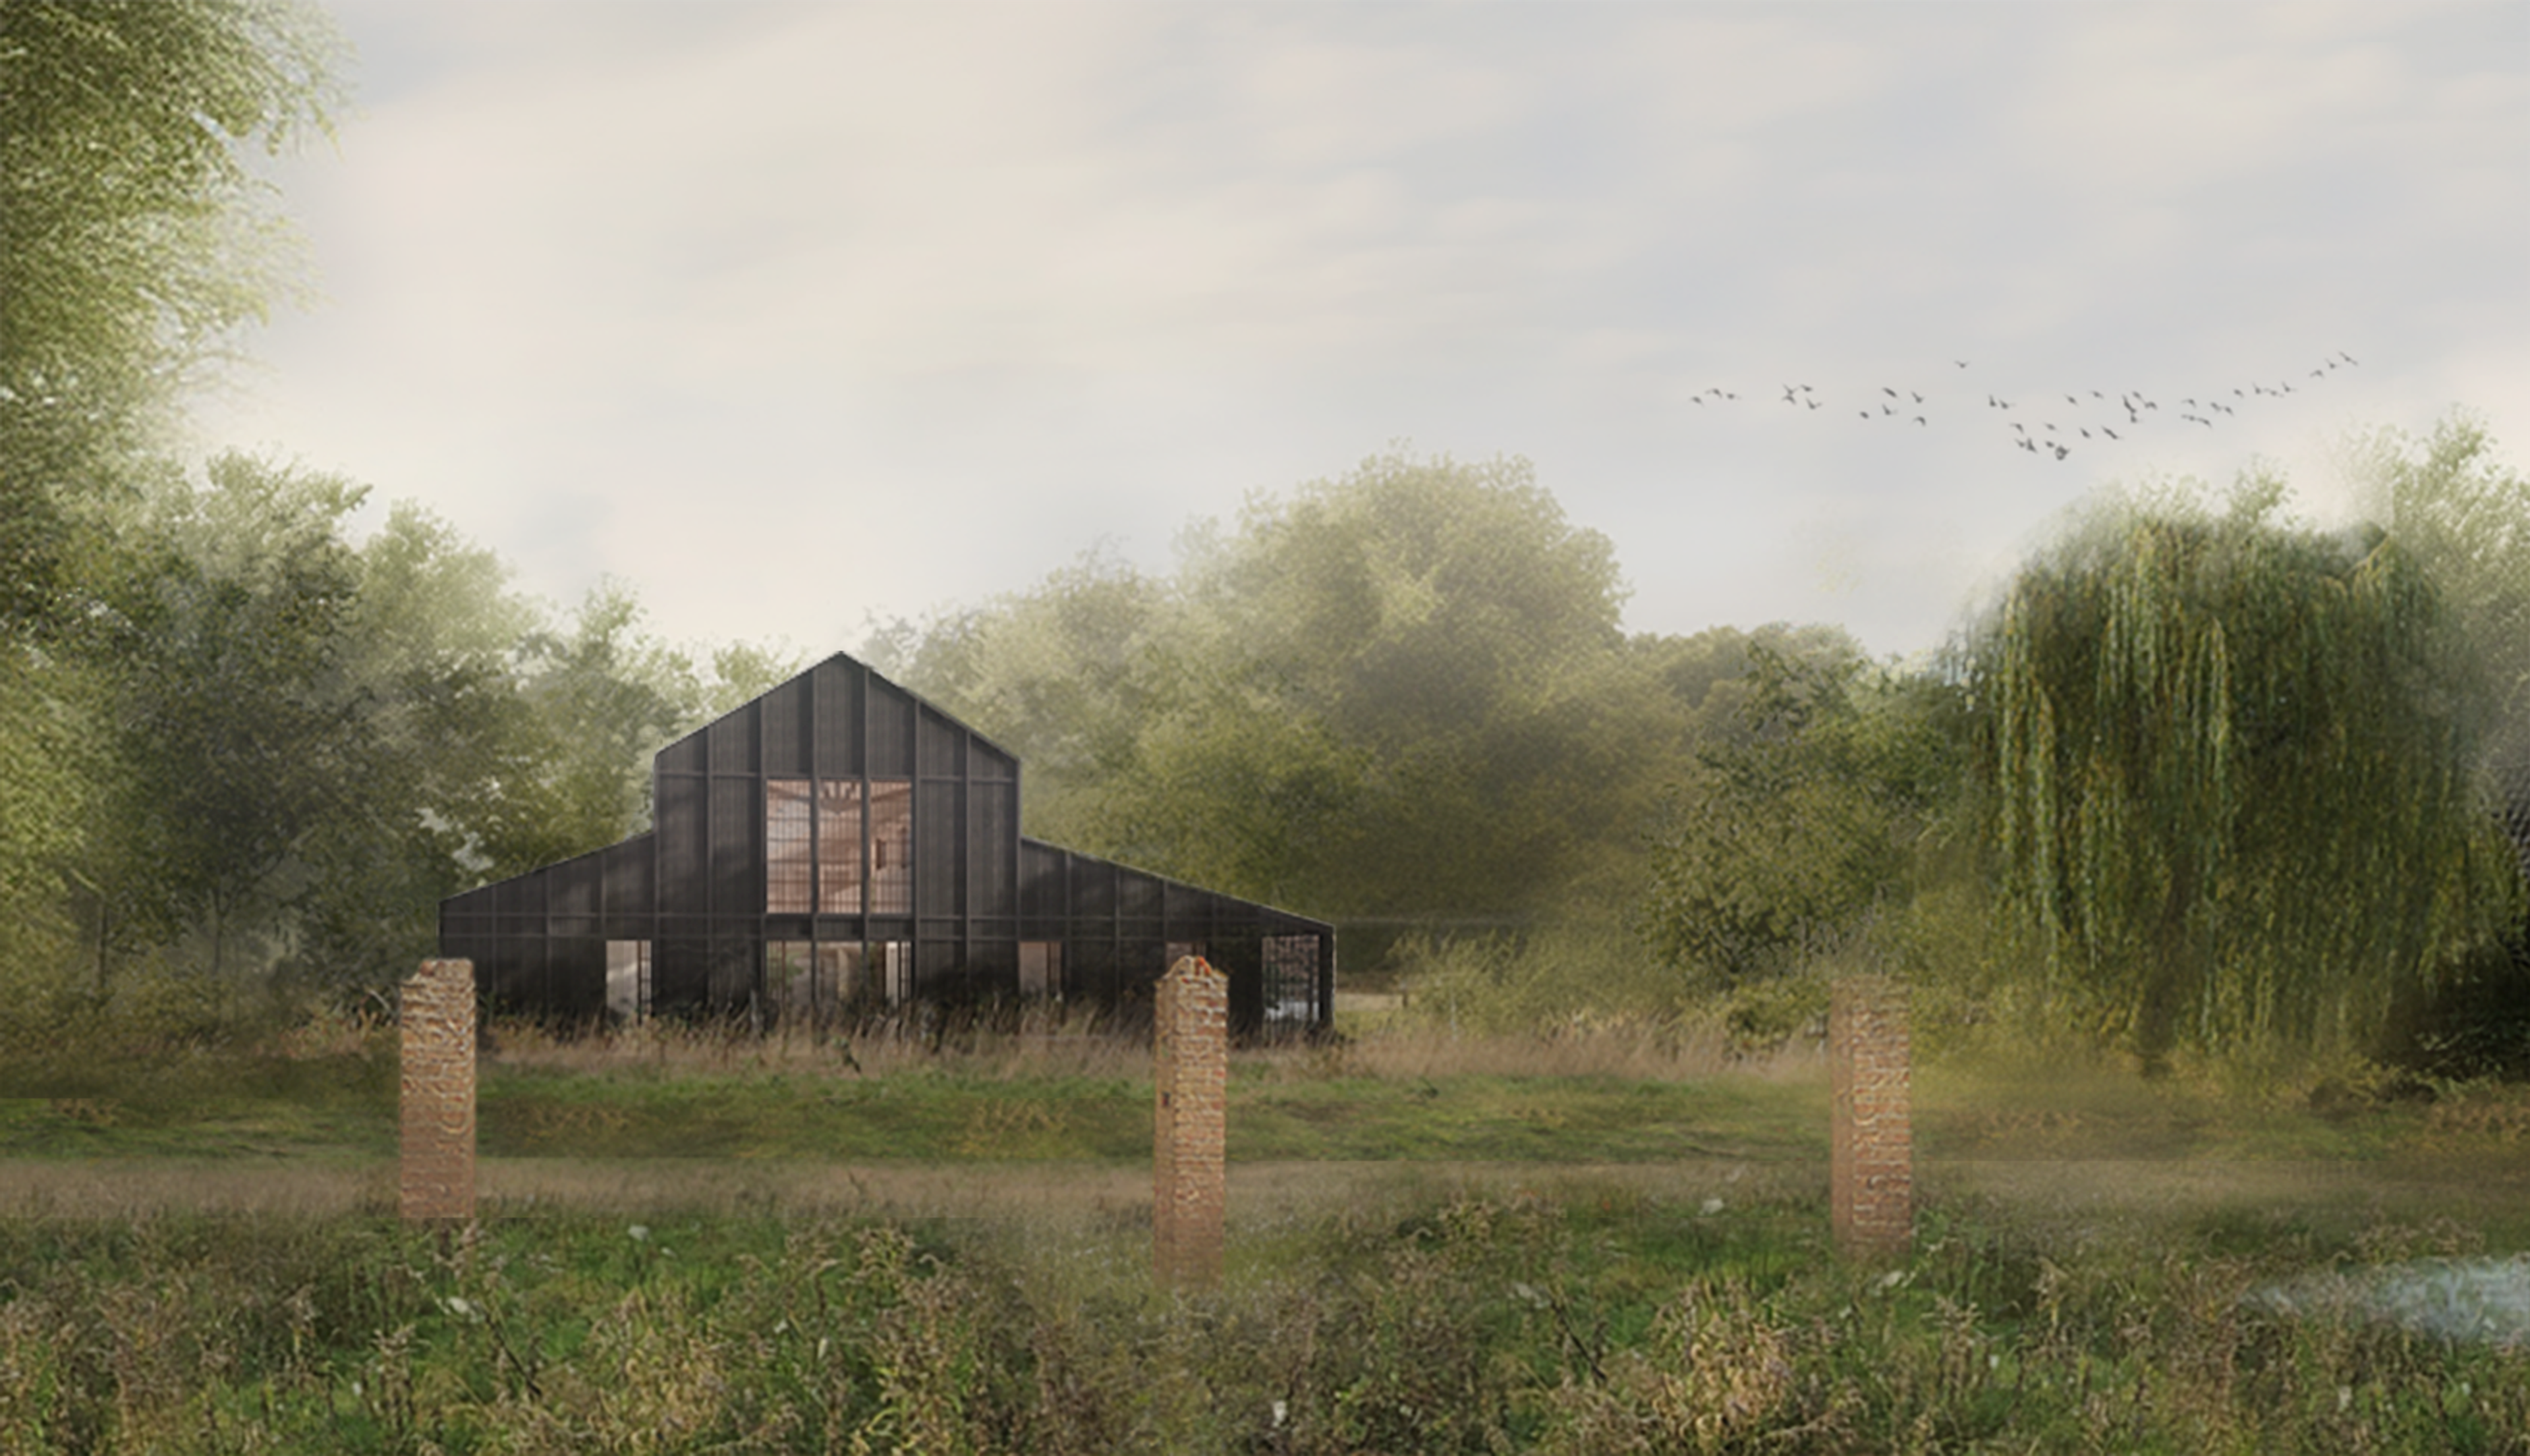 A low-impact eco-home on the grounds of a derelict post-war steel barn